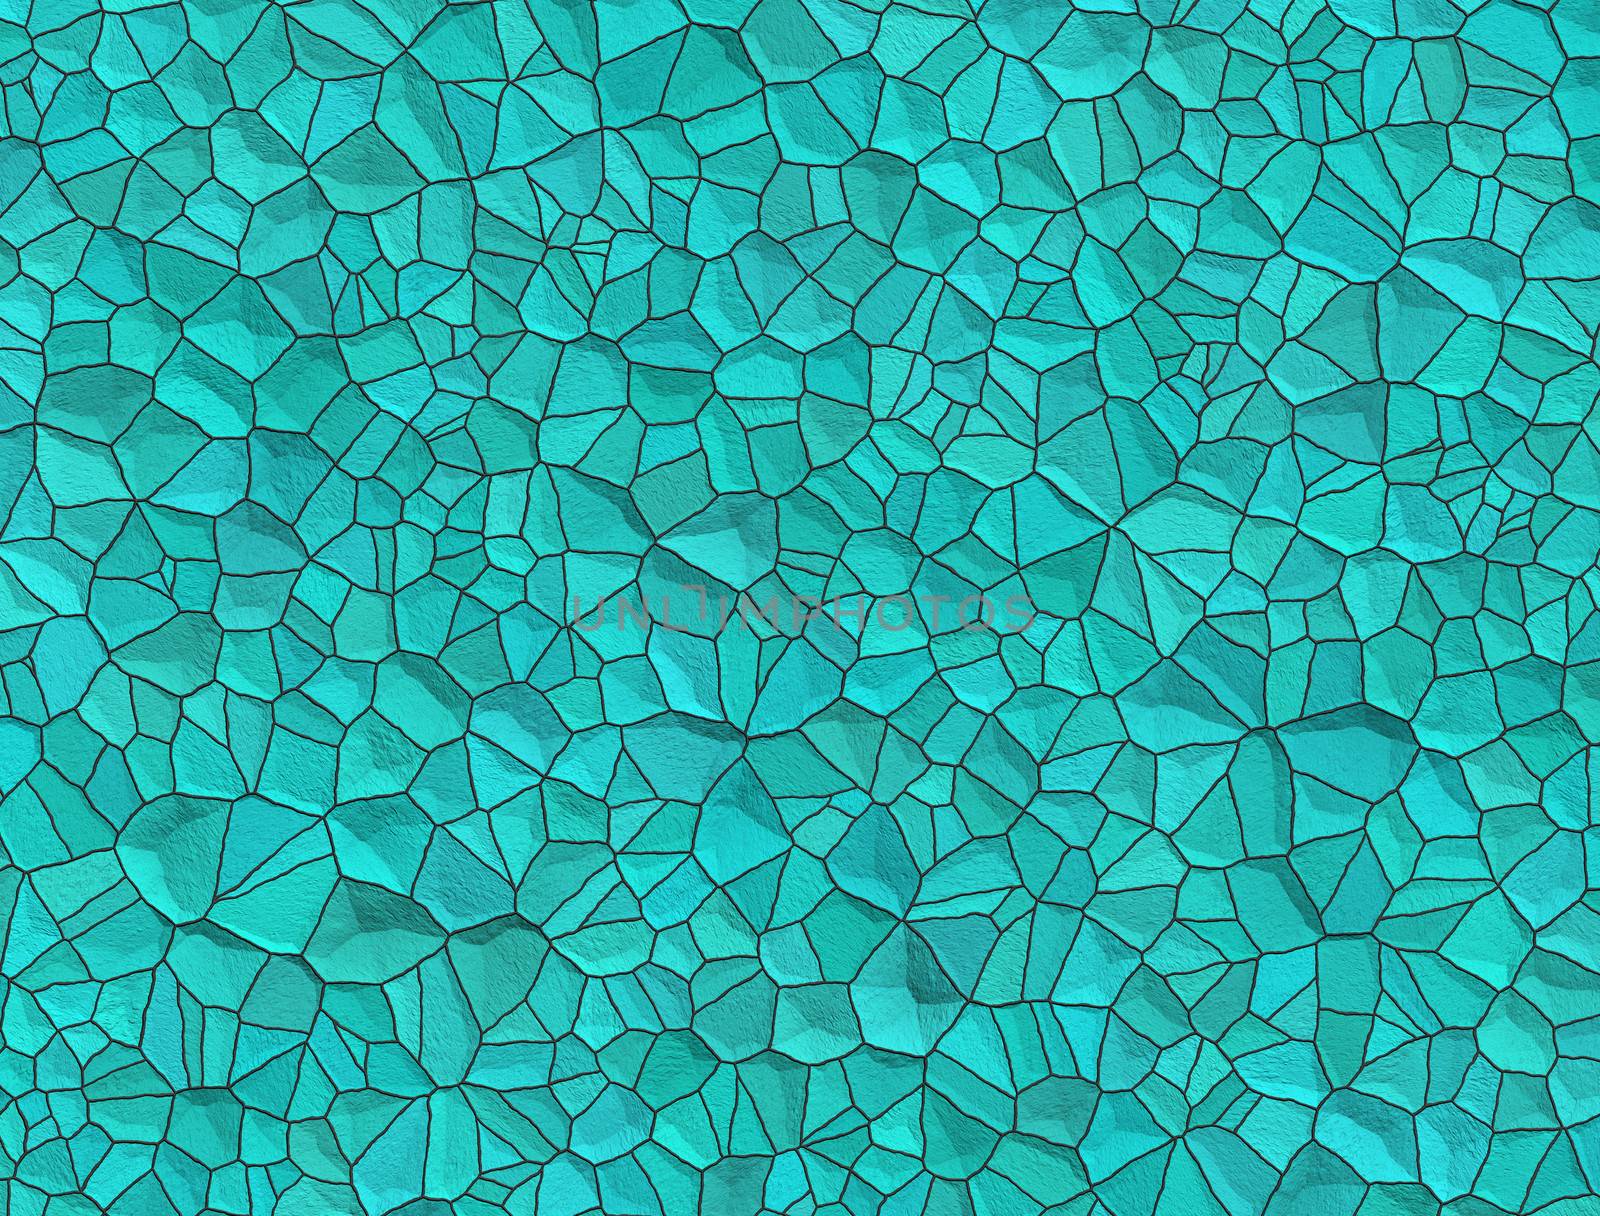 Texture of polished wet turquoise gemstones by sfinks